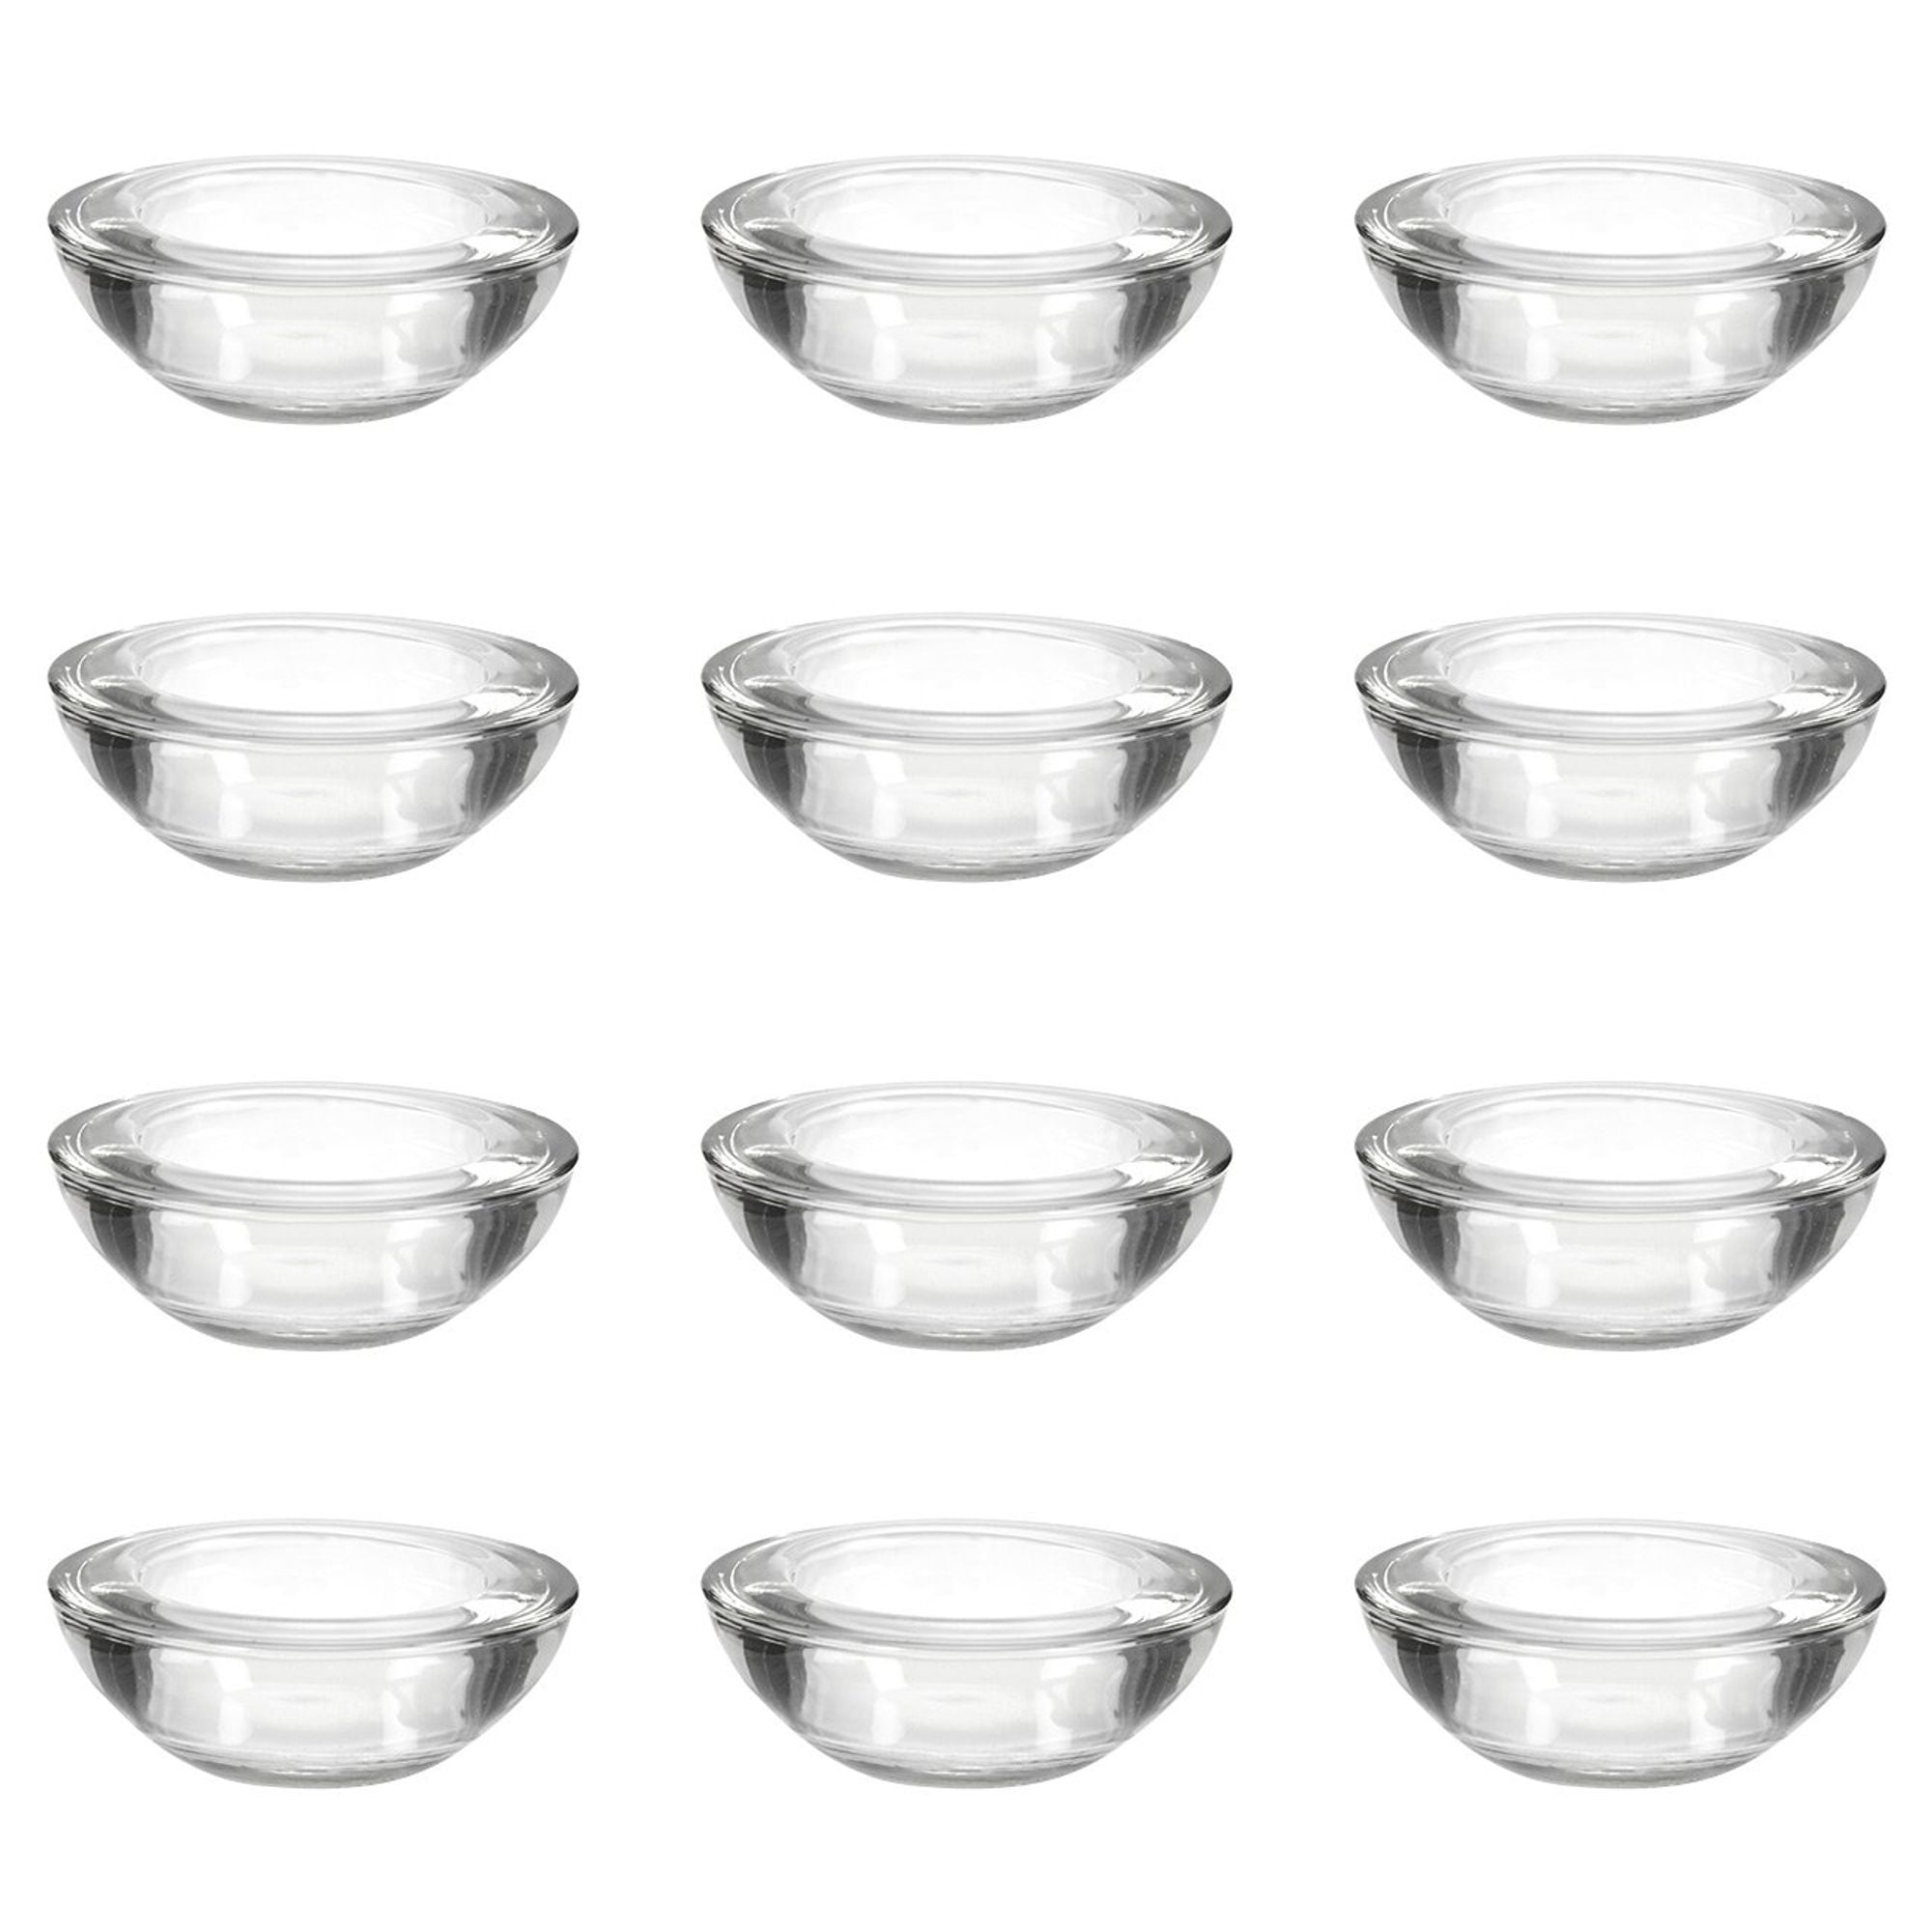 Lot of 12 Clear Round Glass Bowls Wedding Party Table Decoration Candle Holders 